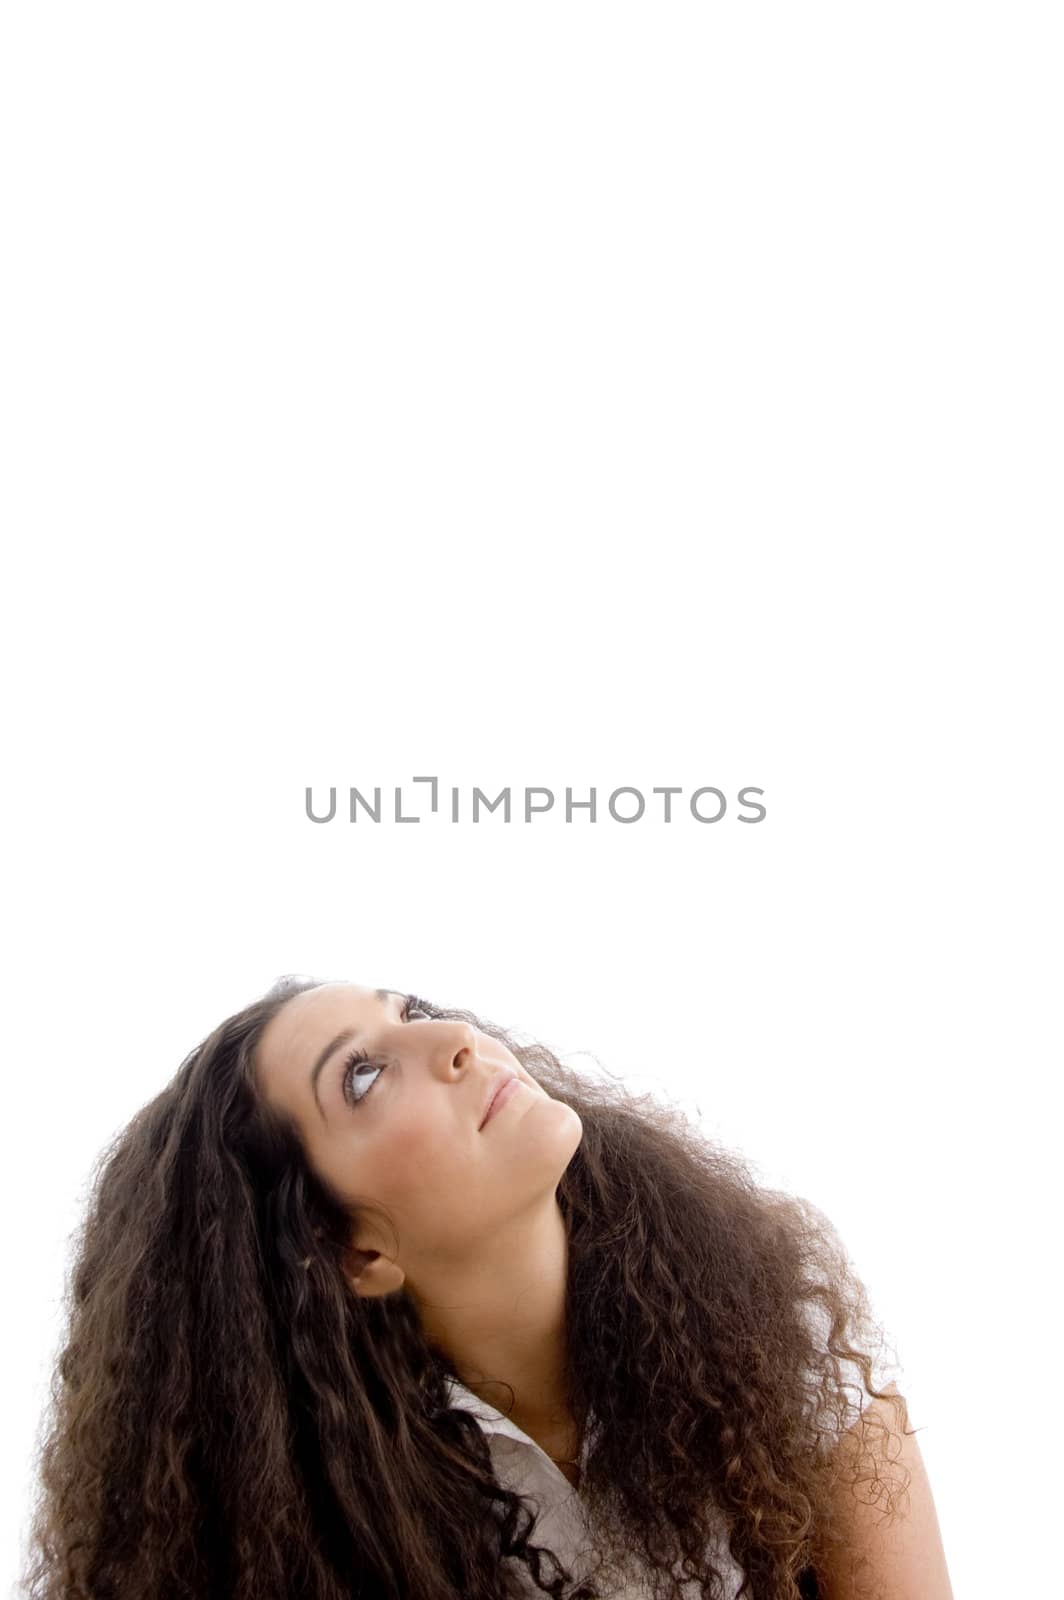 attractive woman looking upwards on an isolated background